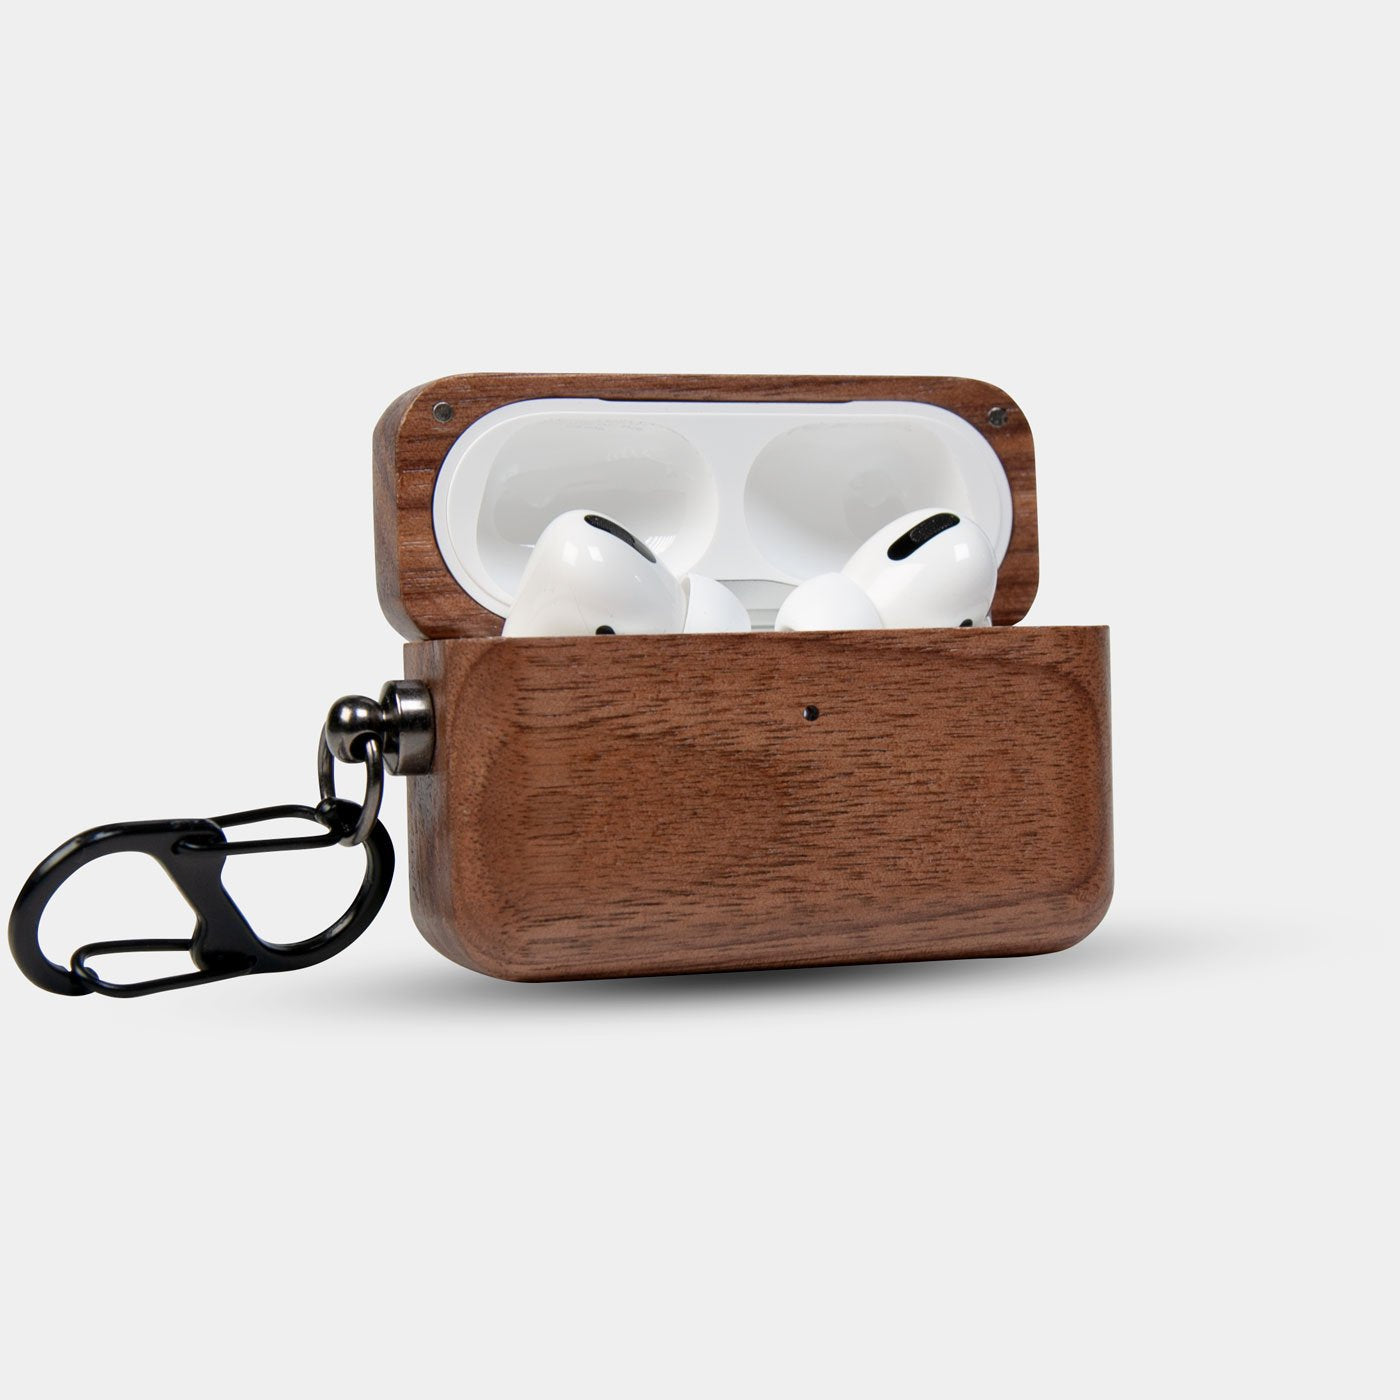 Custom Los Angeles Galaxy AirPods Cases | AirPods | AirPods Pro - Carved Wood Los Angeles Galaxy AirPods Cover